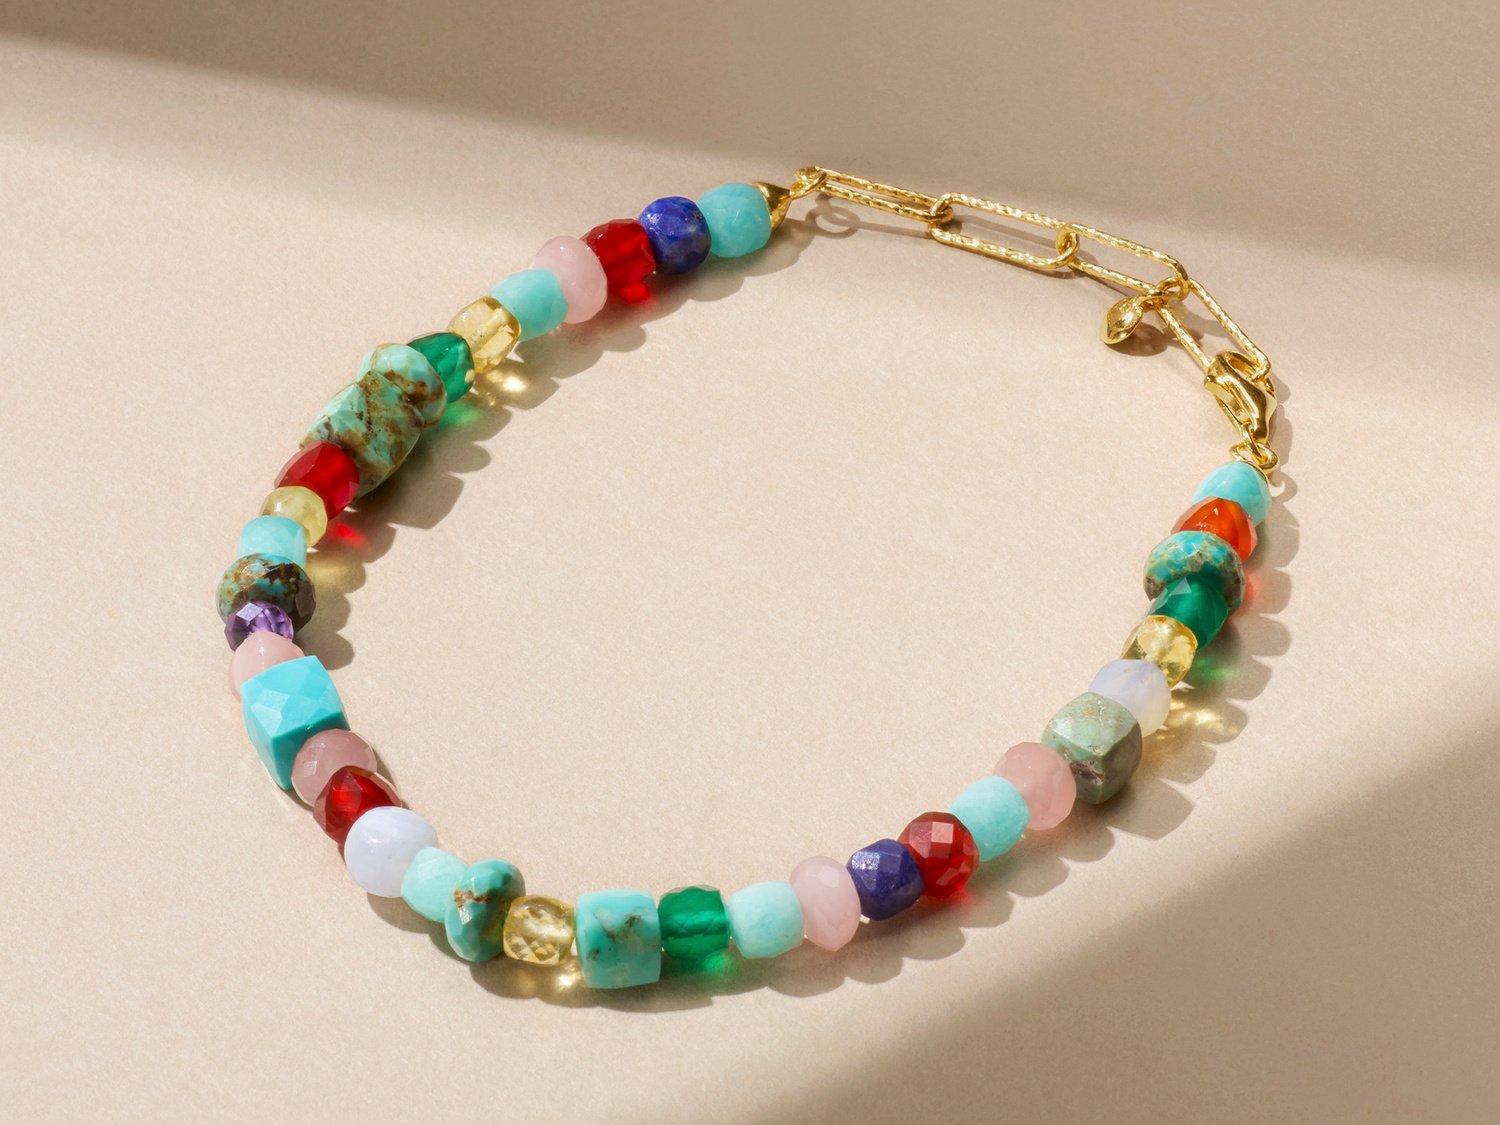 A gemstone bracelet of blue, green, pink, purple and red stones sits on a beige background.